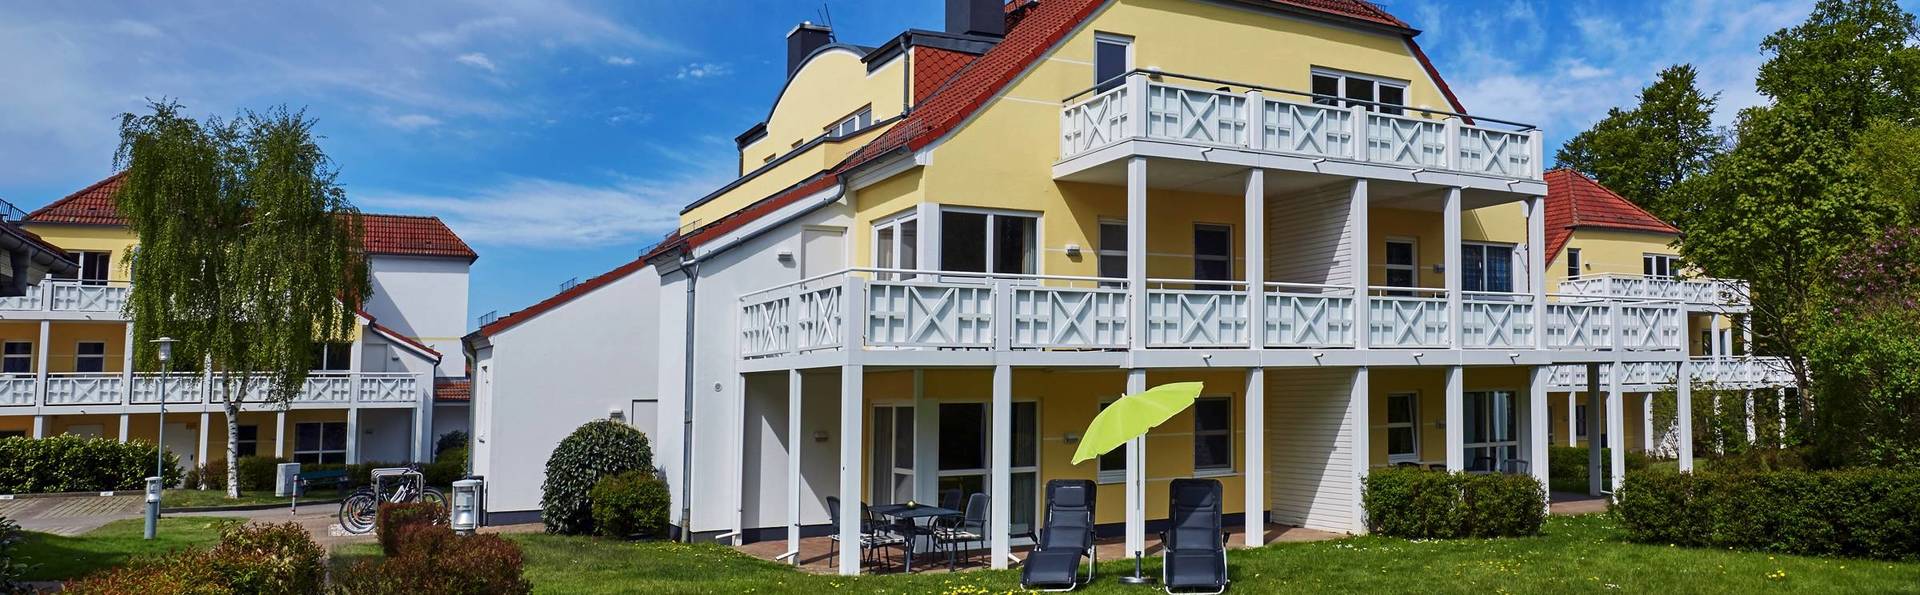 Welcome to the sunny island - H+ Hotel Ferienpark Usedom